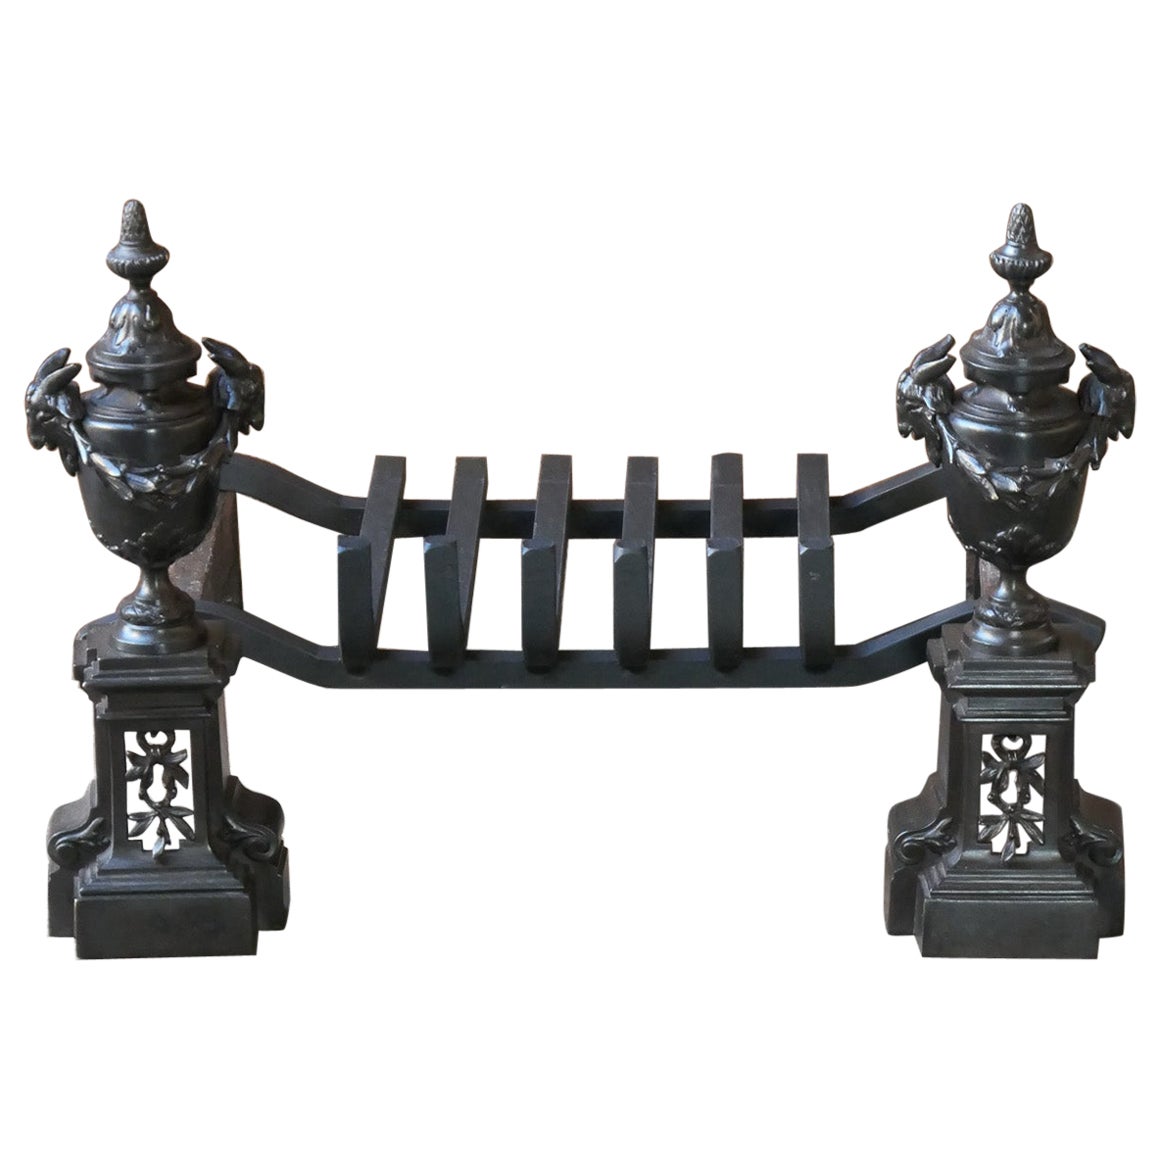 18th-19th Century French Neoclassical Fireplace Grate or Fire Grate